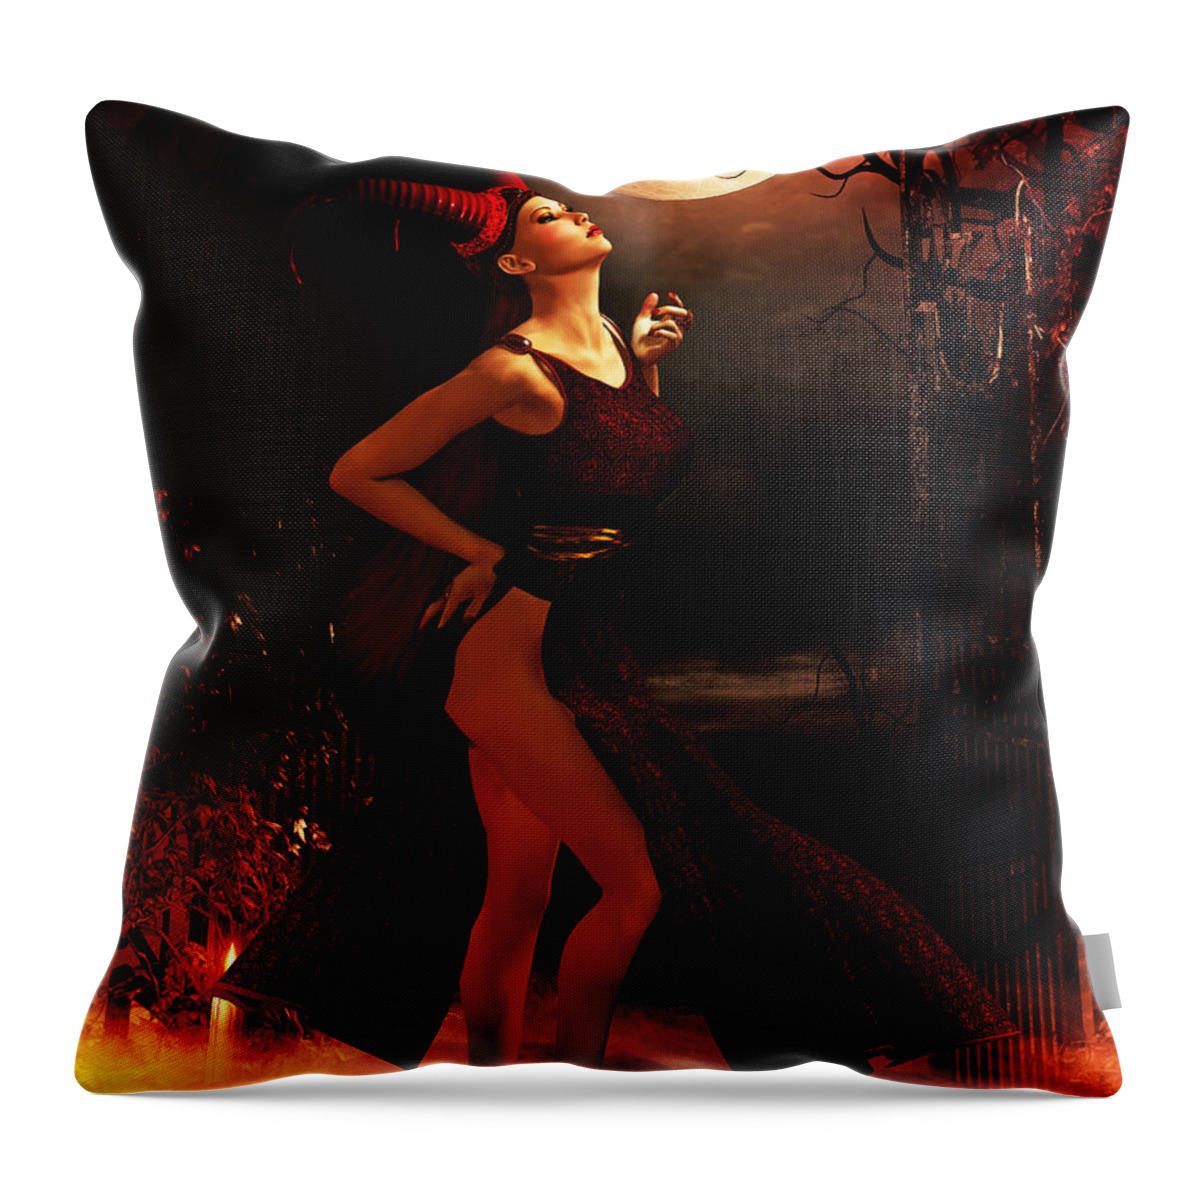 Moon Throw Pillow featuring the digital art Moon Ritual by Alicia Hollinger